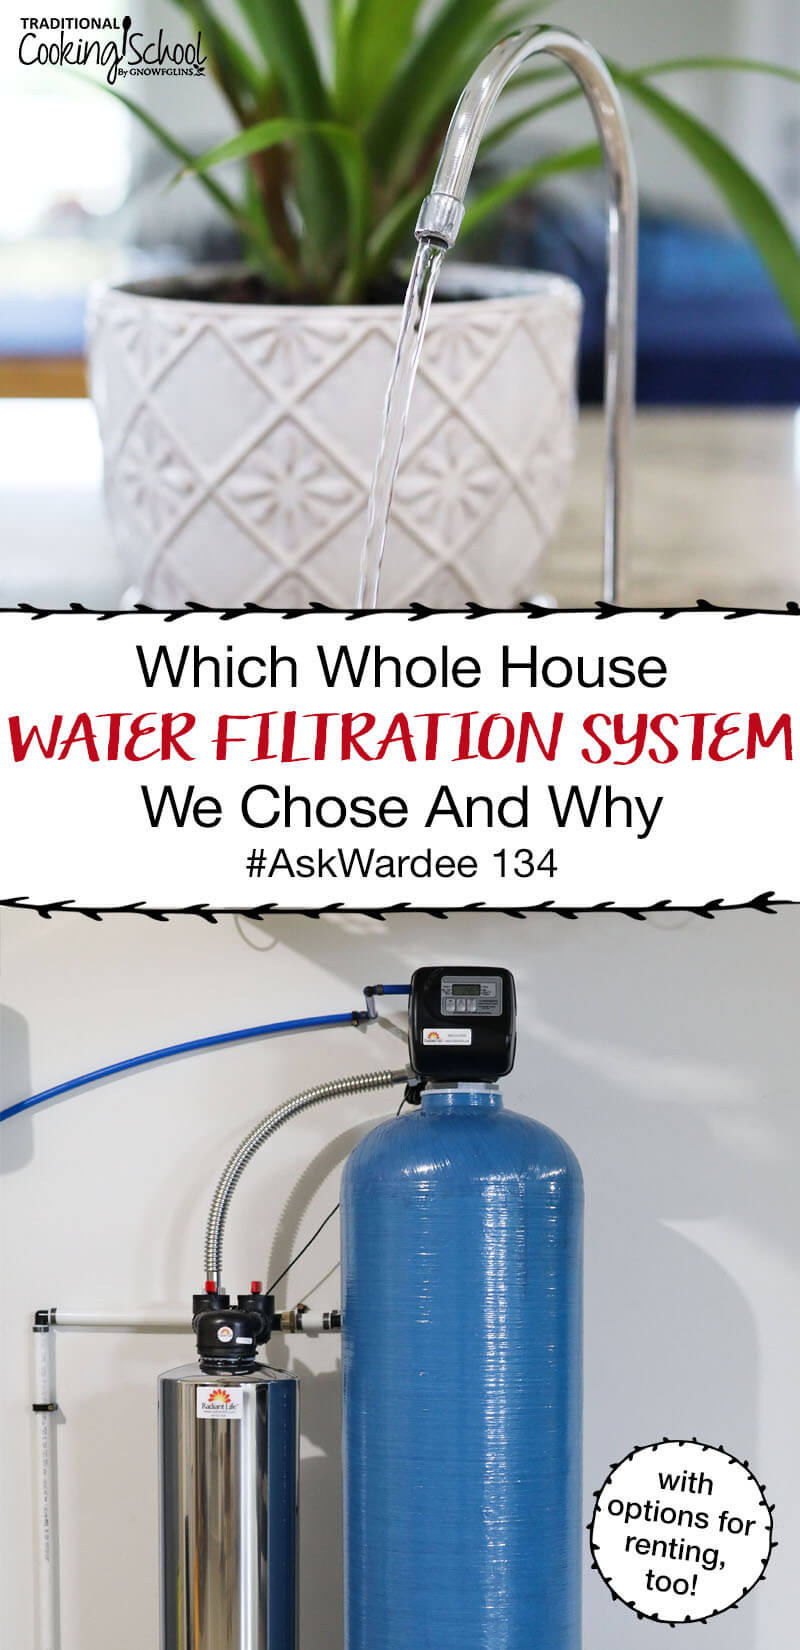 photo collage of a whole house water filtration system, including a water faucet turned on so clean water is flowing out into the sink, and a blue water filtration tank, with text overlay: "Which Whole House Water Filtration System We Chose And Why #AskWardee 134 (with options for renting, too!)"